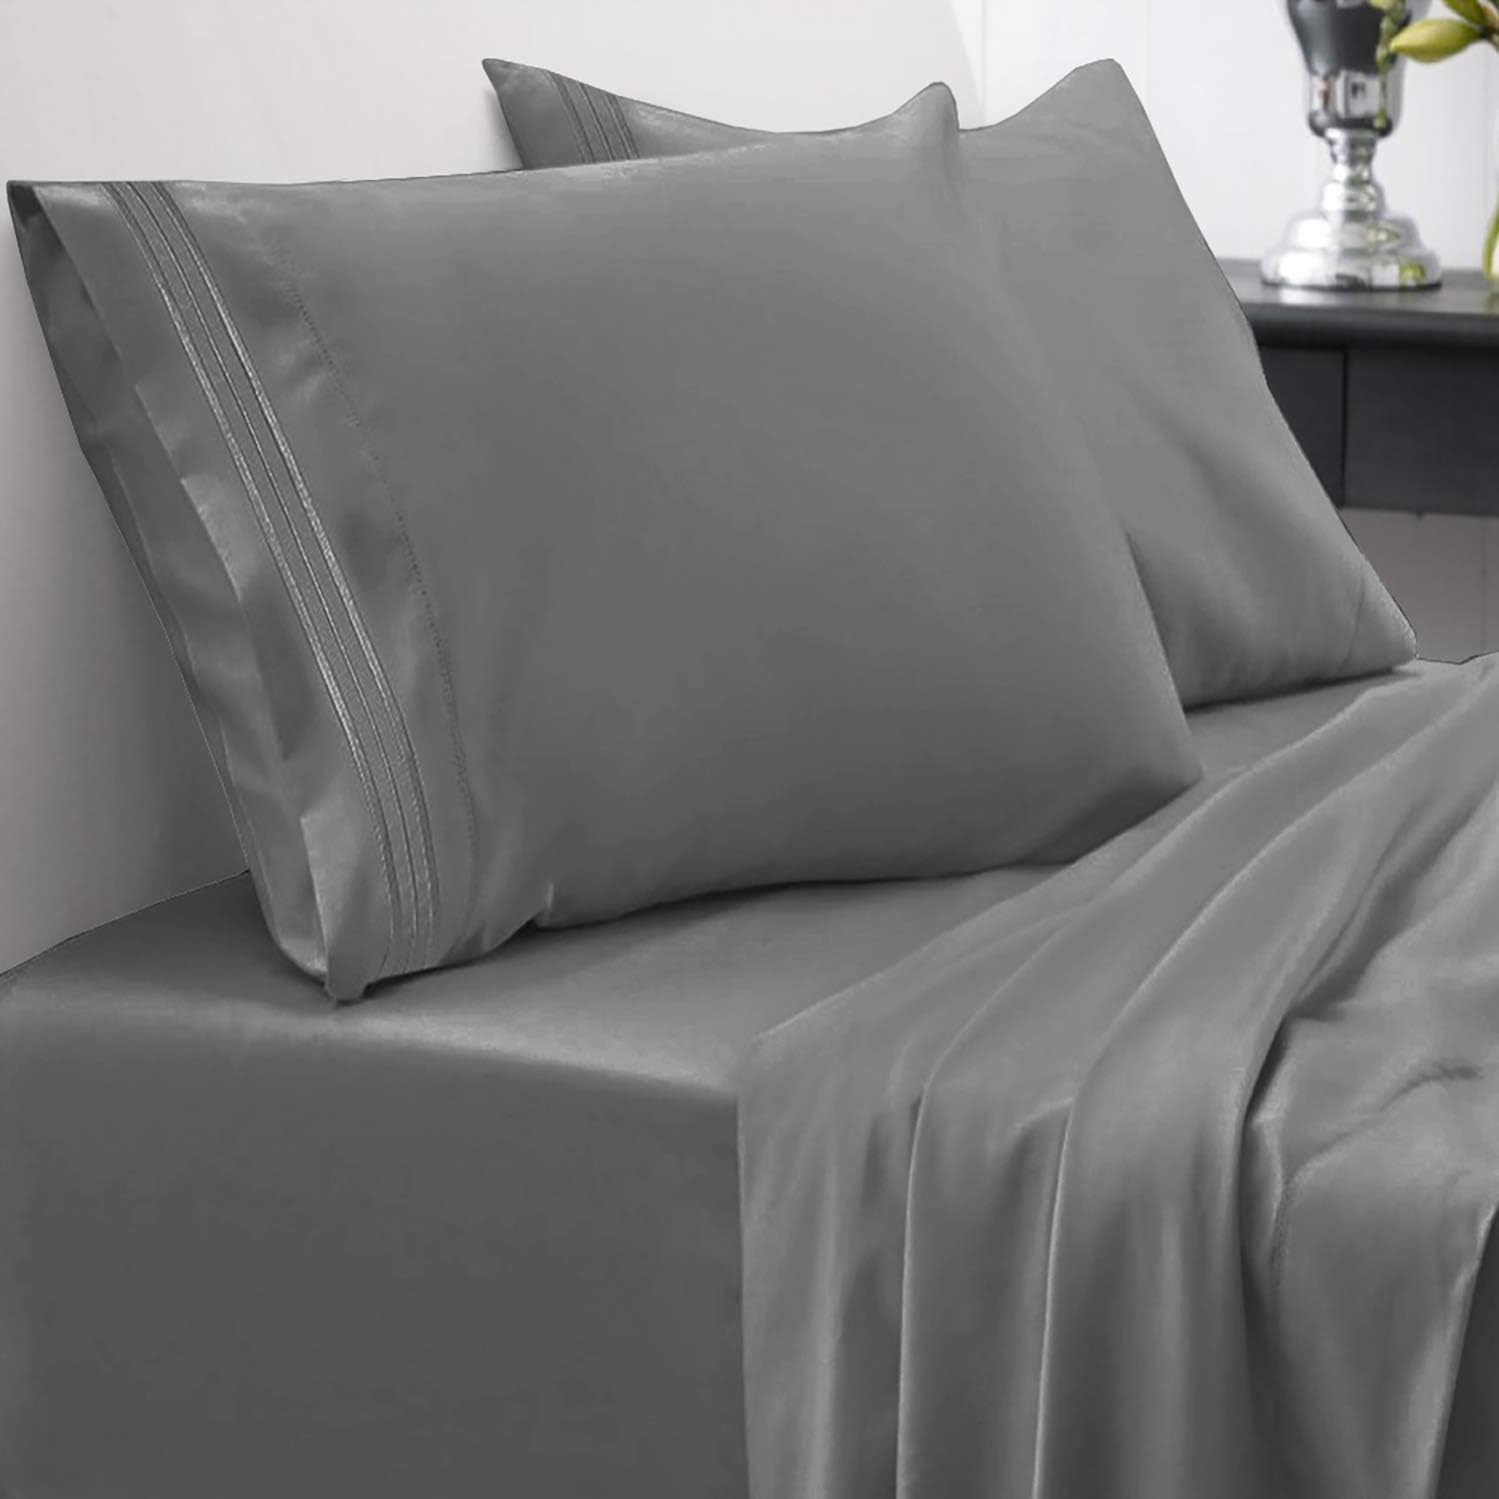 Queen Size Bed Sheets - Breathable Luxury Sheets with [...]